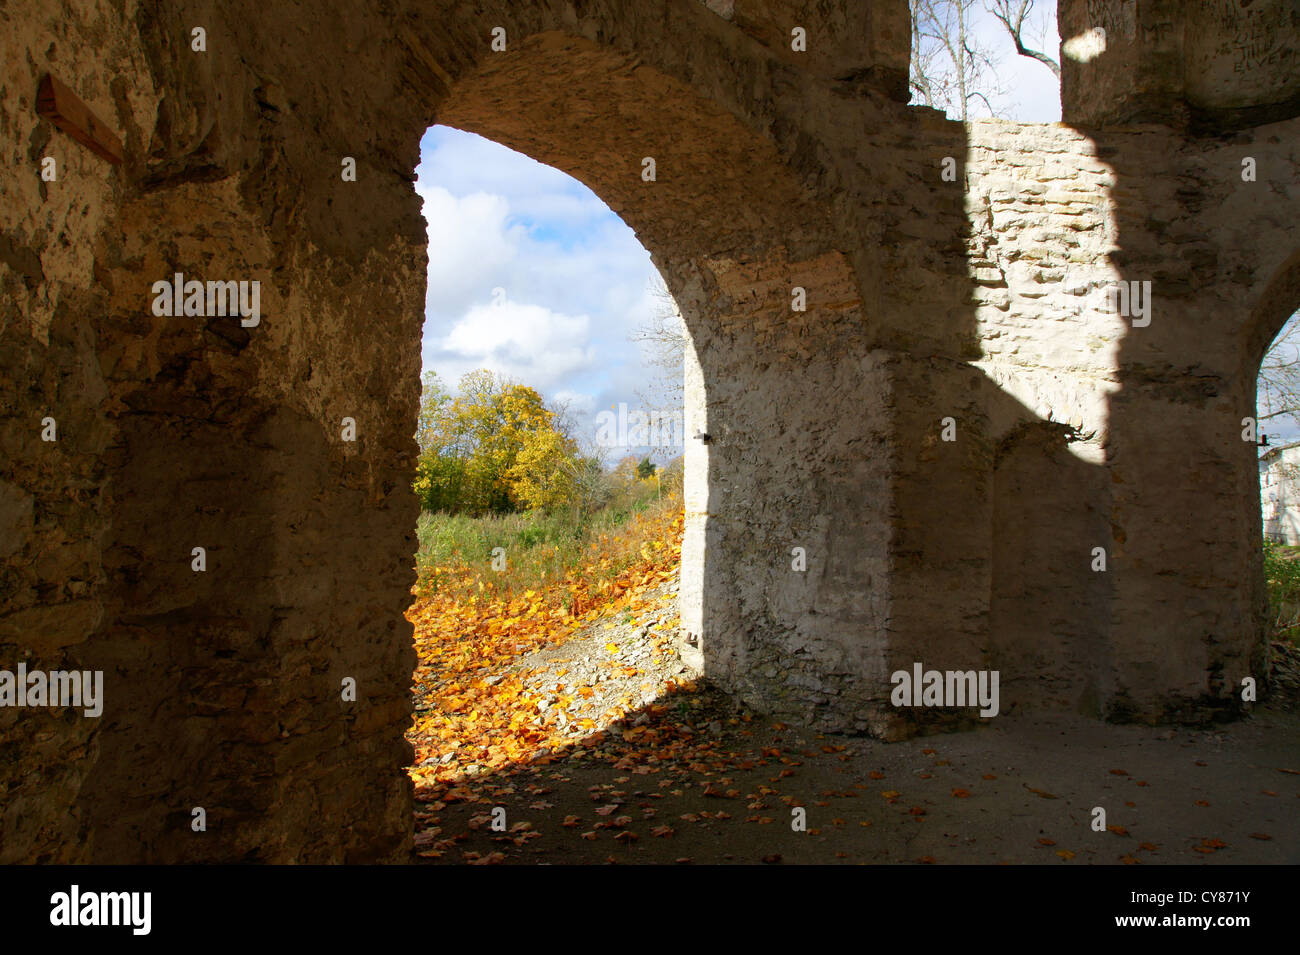 View on the nature from ruins of an ancient tower Stock Photo